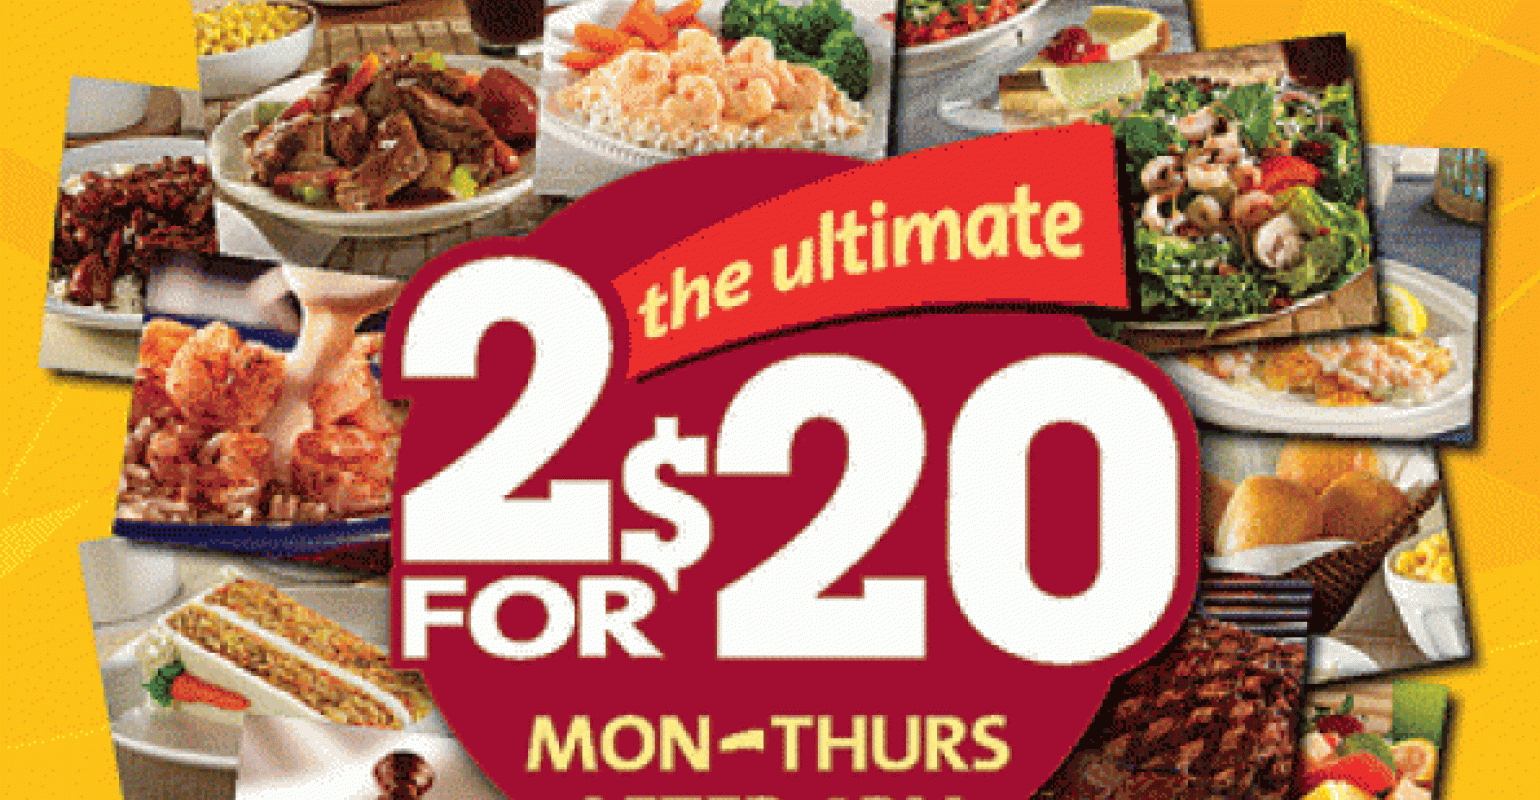 Golden Corral touts value with 2 for 20 deal Nation's Restaurant News